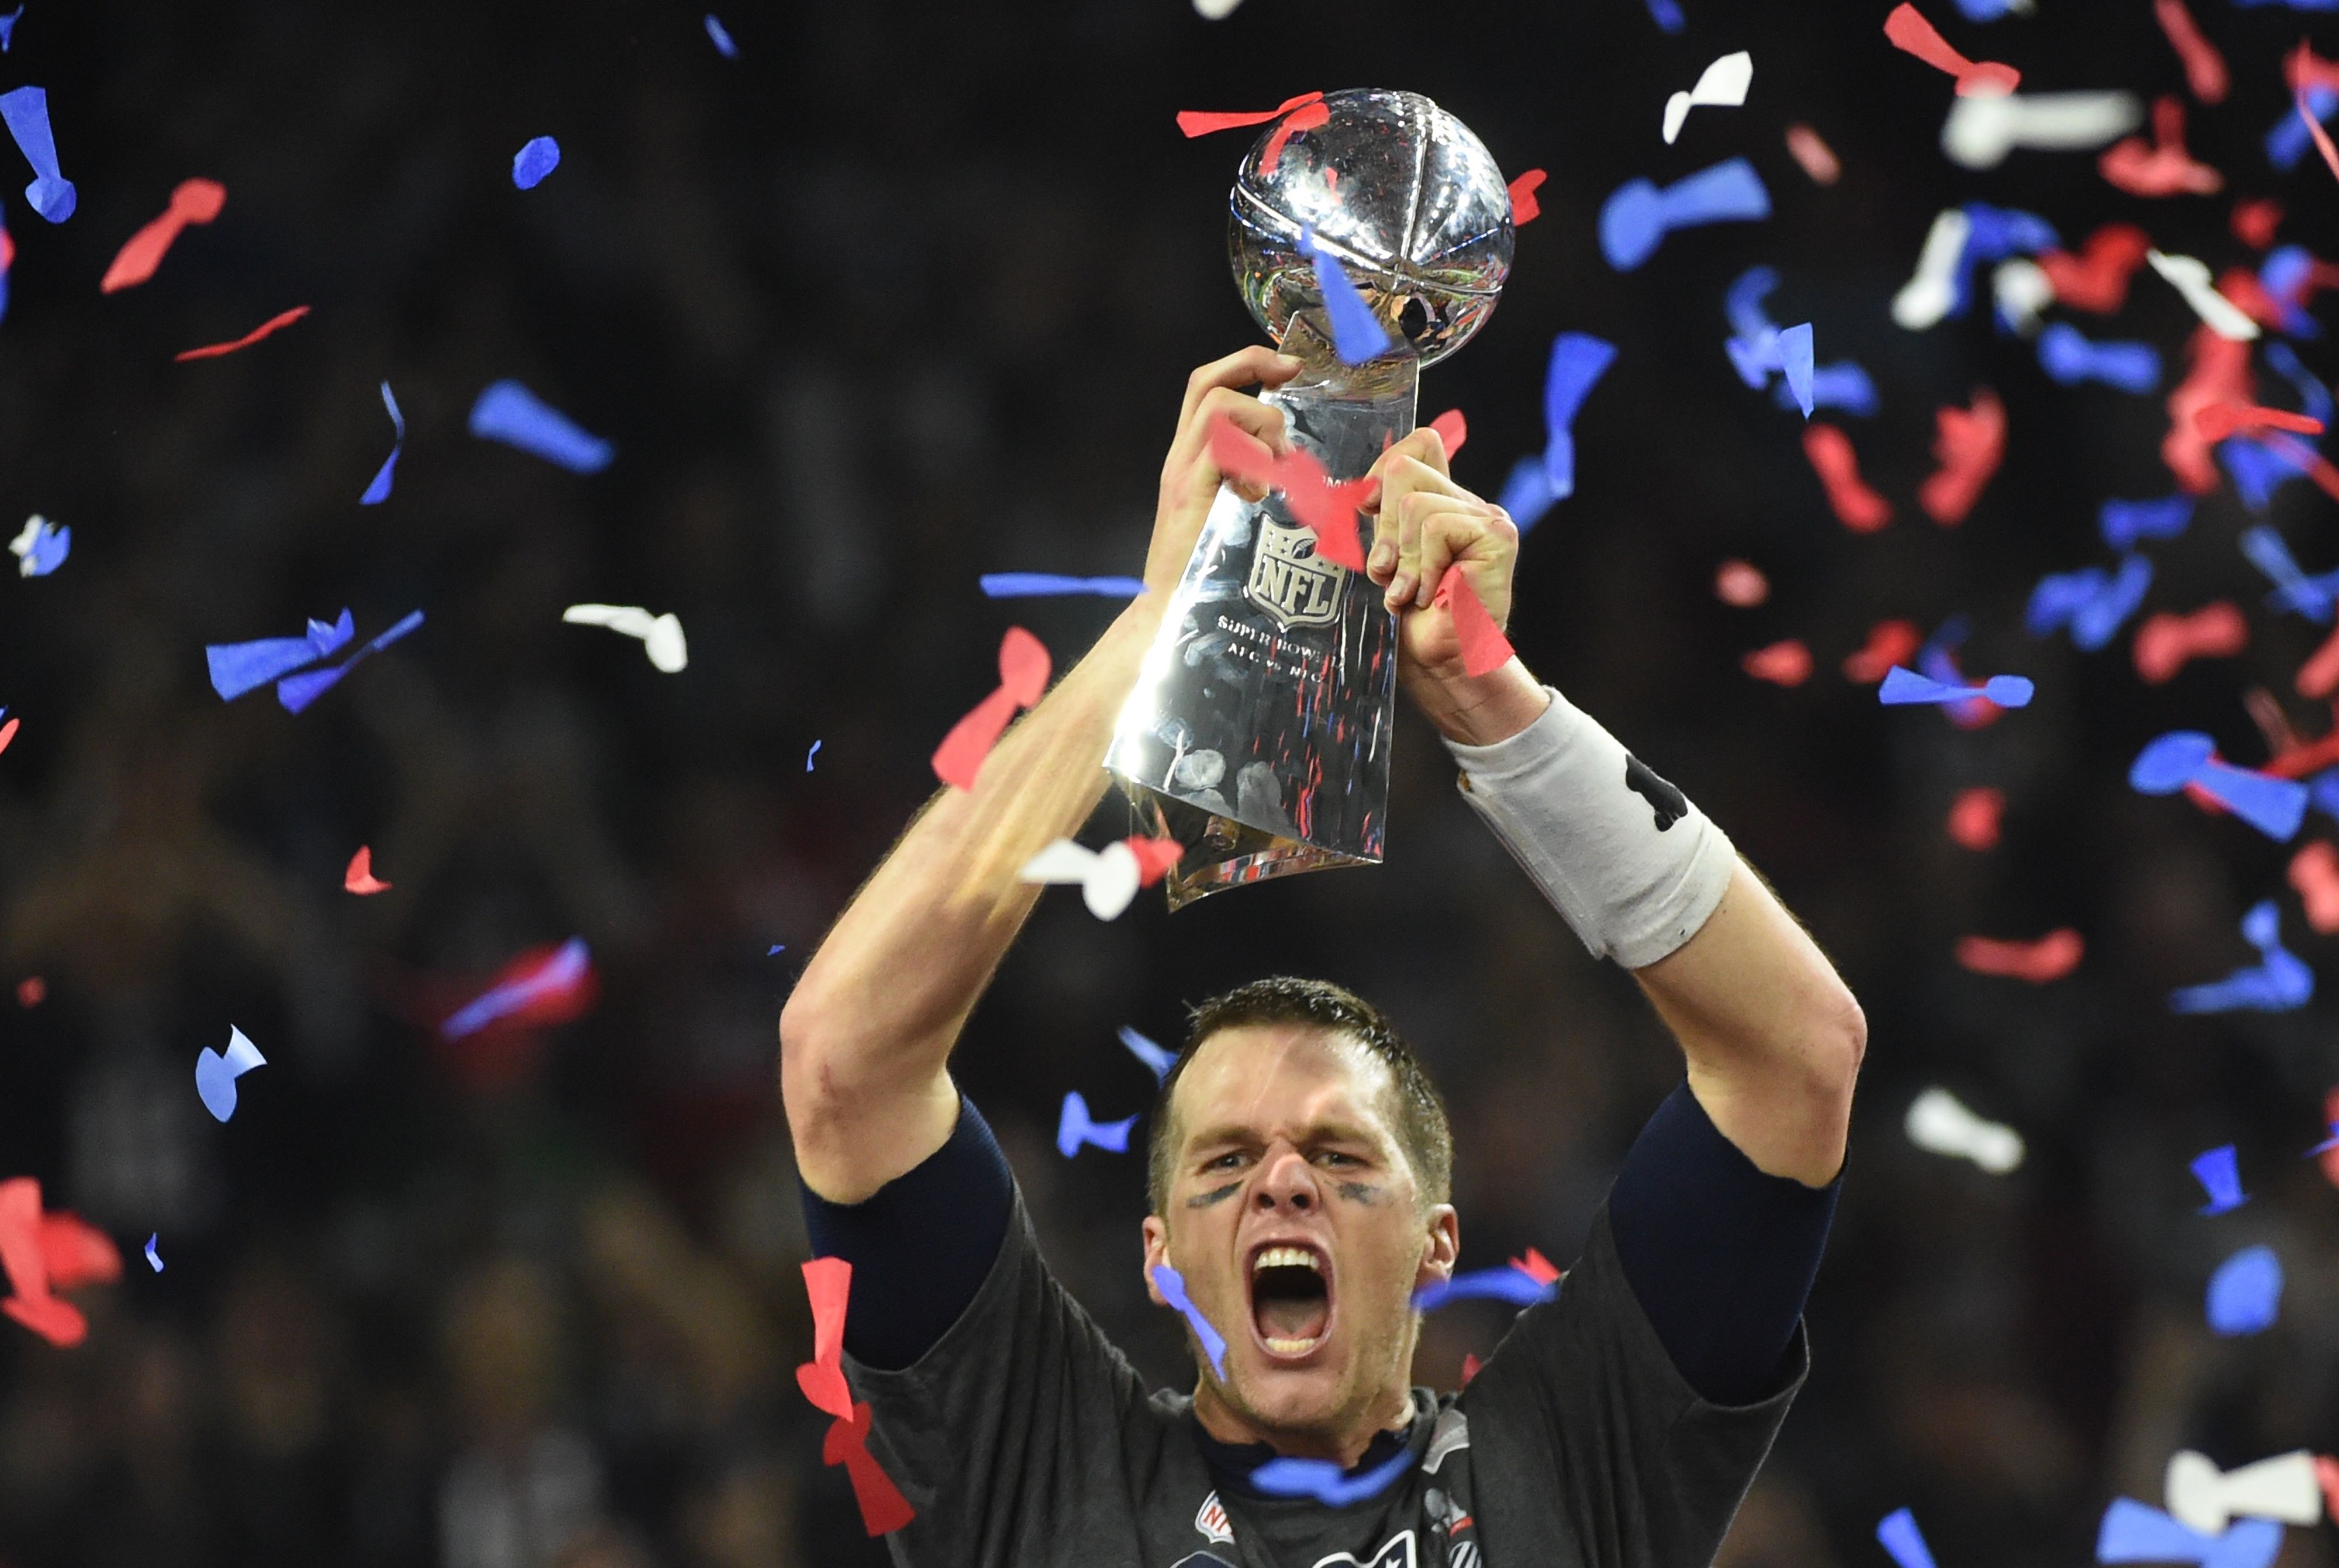 Tom Brady lifts the Lombardi Trophy into the air after winning Super Bowl 51.